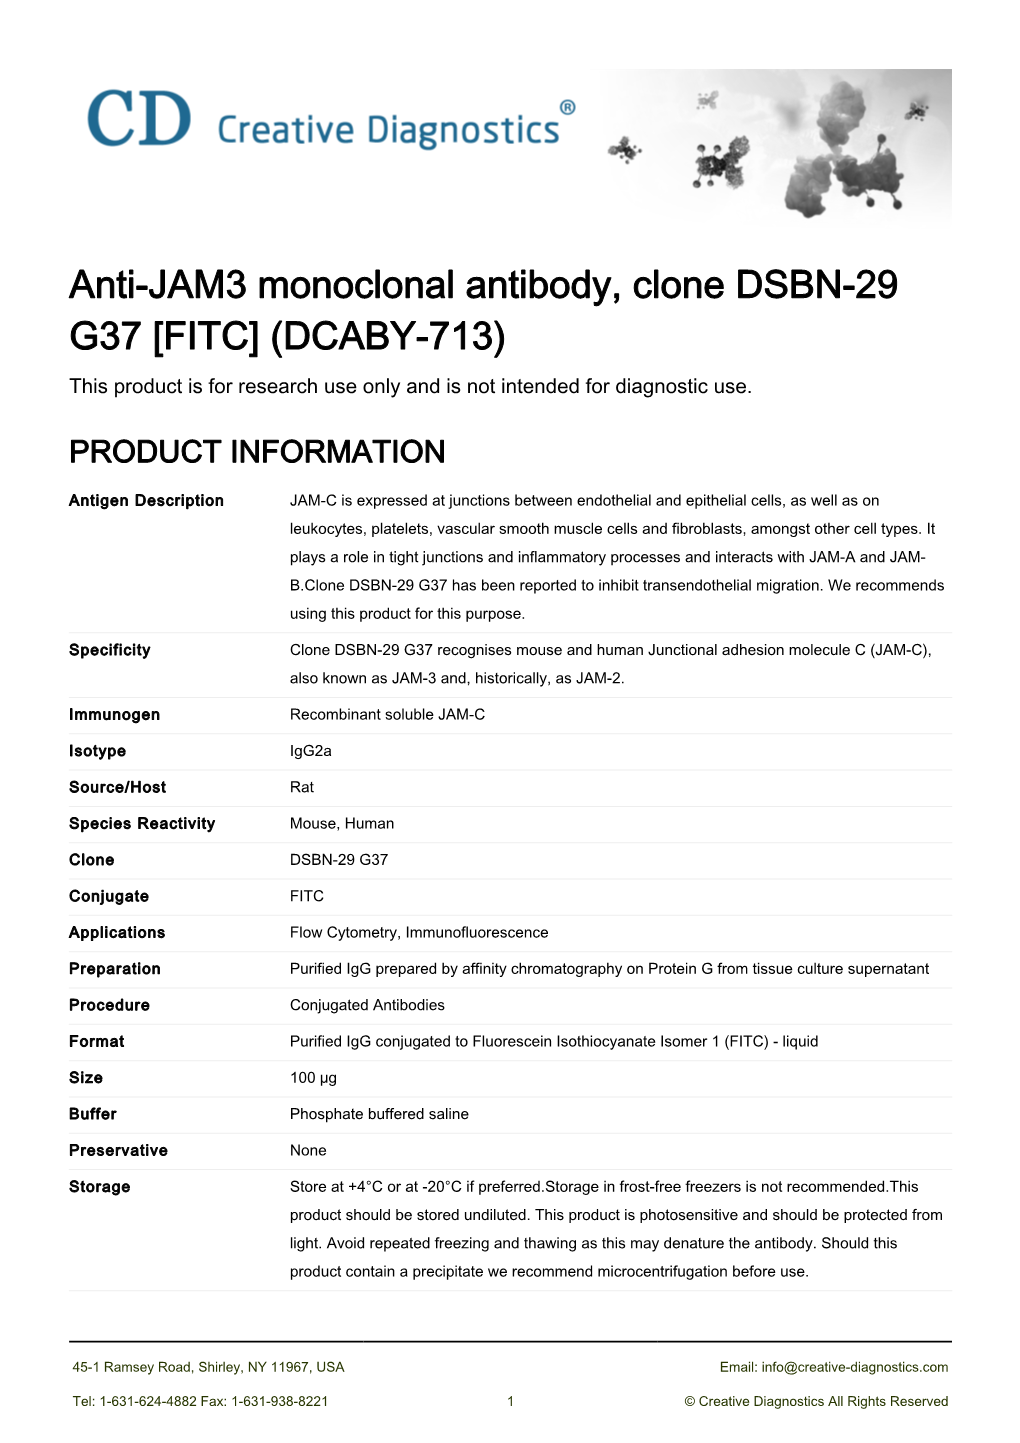 Anti-JAM3 Monoclonal Antibody, Clone DSBN-29 G37 [FITC] (DCABY-713) This Product Is for Research Use Only and Is Not Intended for Diagnostic Use